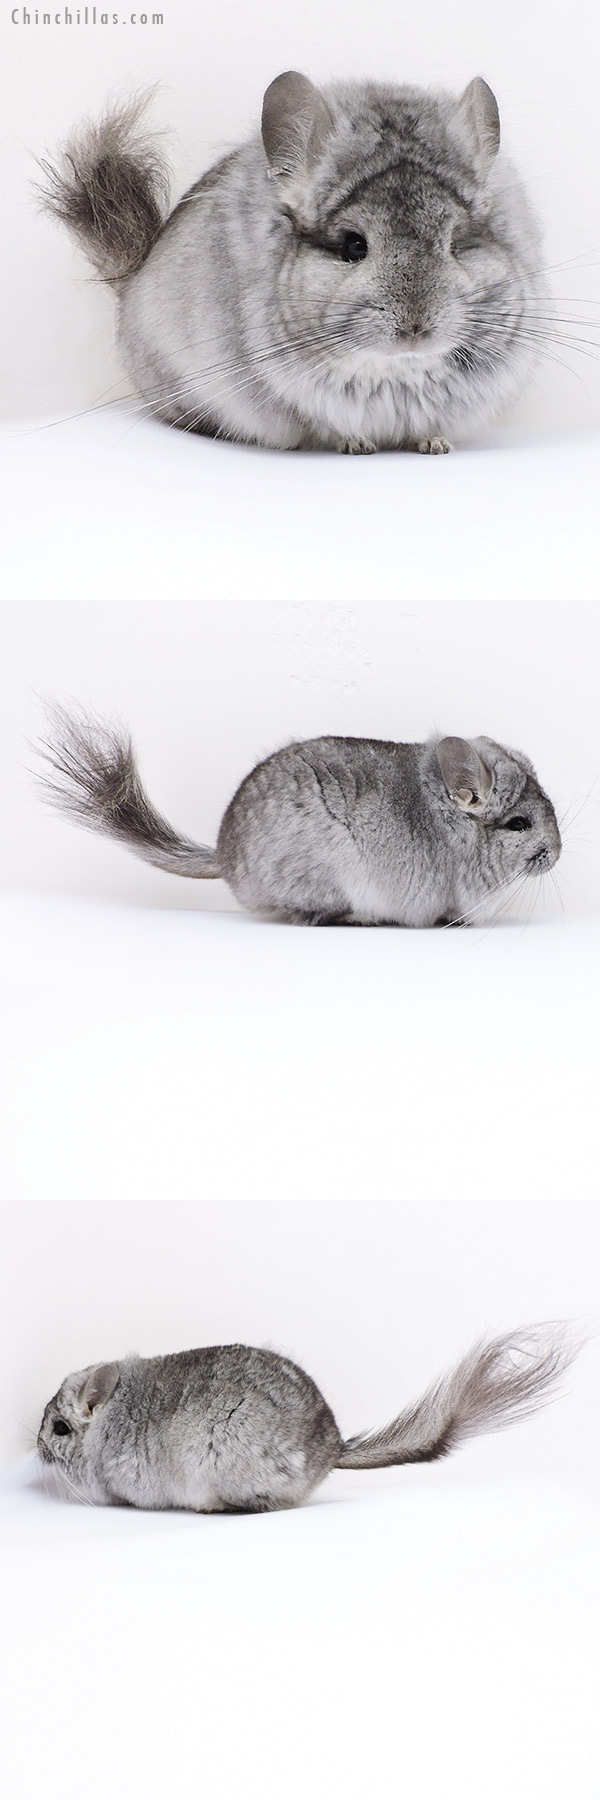 Chinchilla or related item offered for sale or export on Chinchillas.com - 18075 Exceptional Blocky Standard  Royal Persian Angora Male Chinchilla